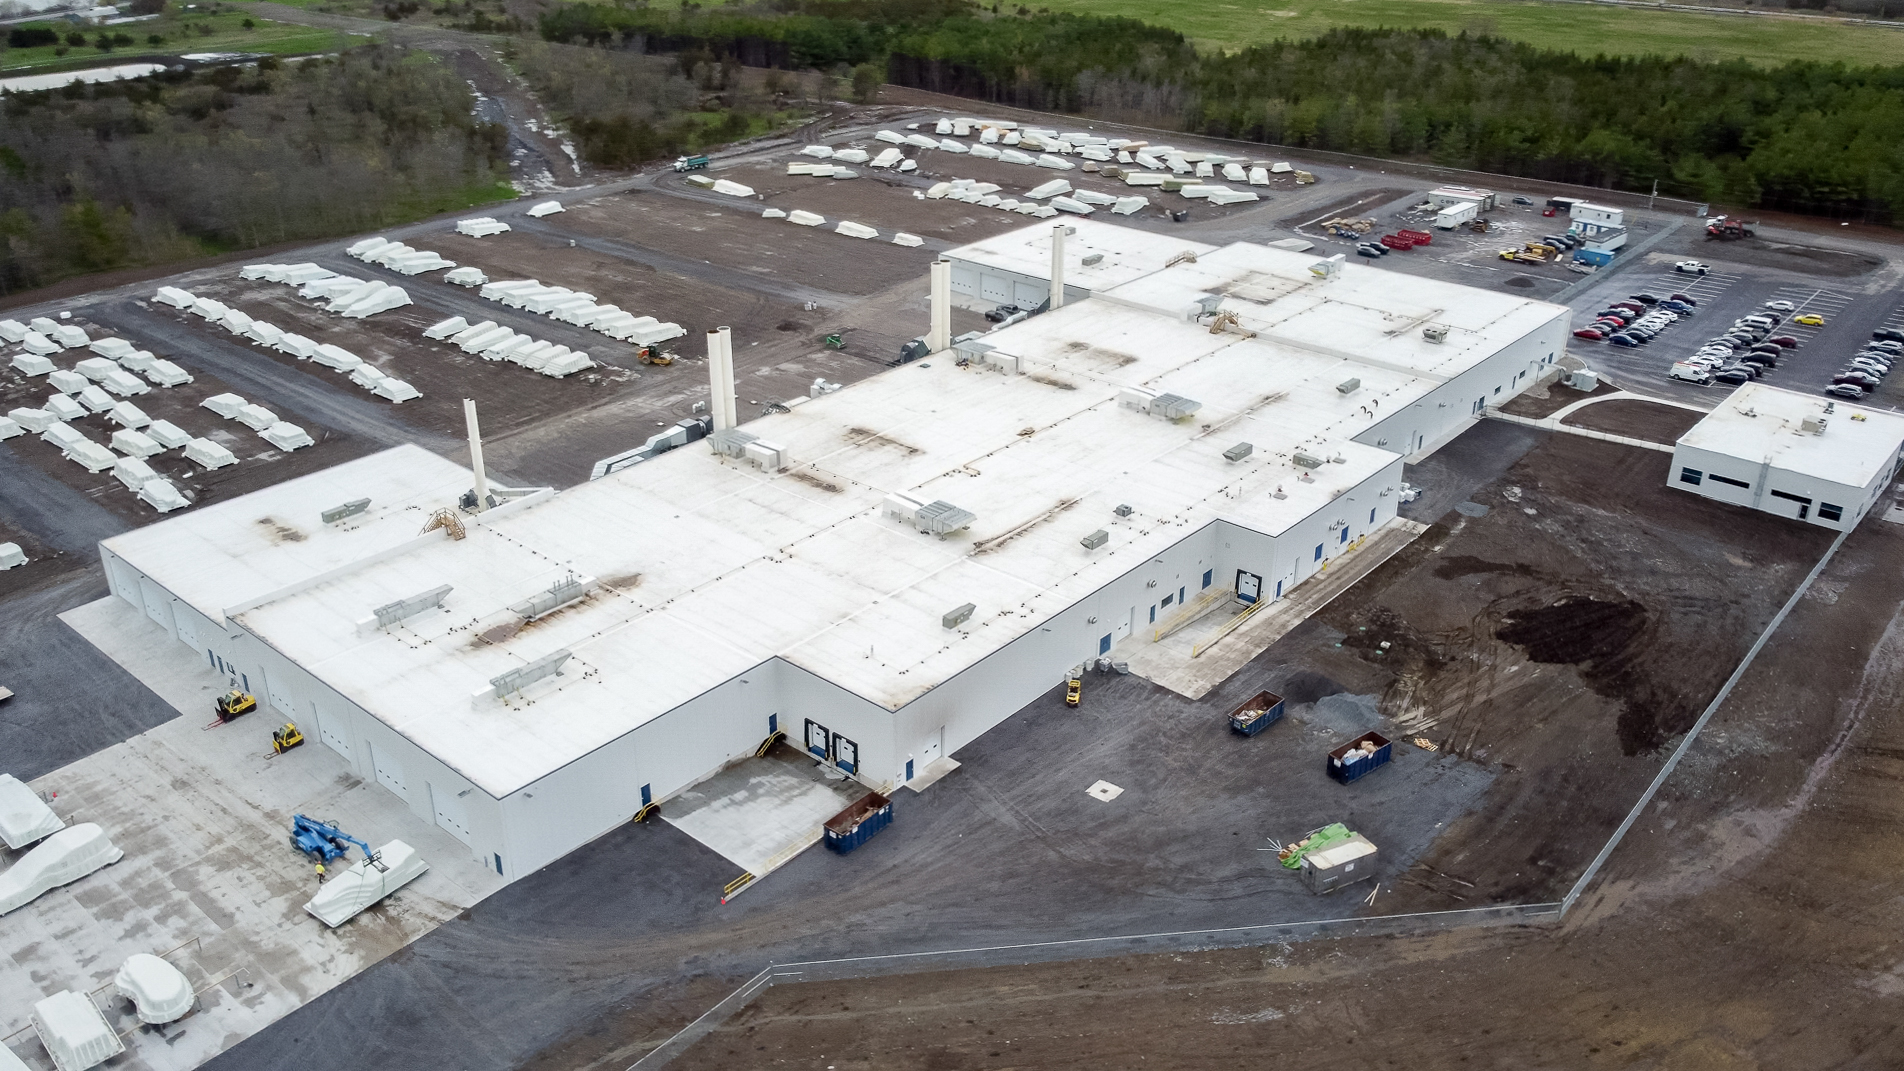 Latham’s new state-of-the-art fiberglass manufacturing facility